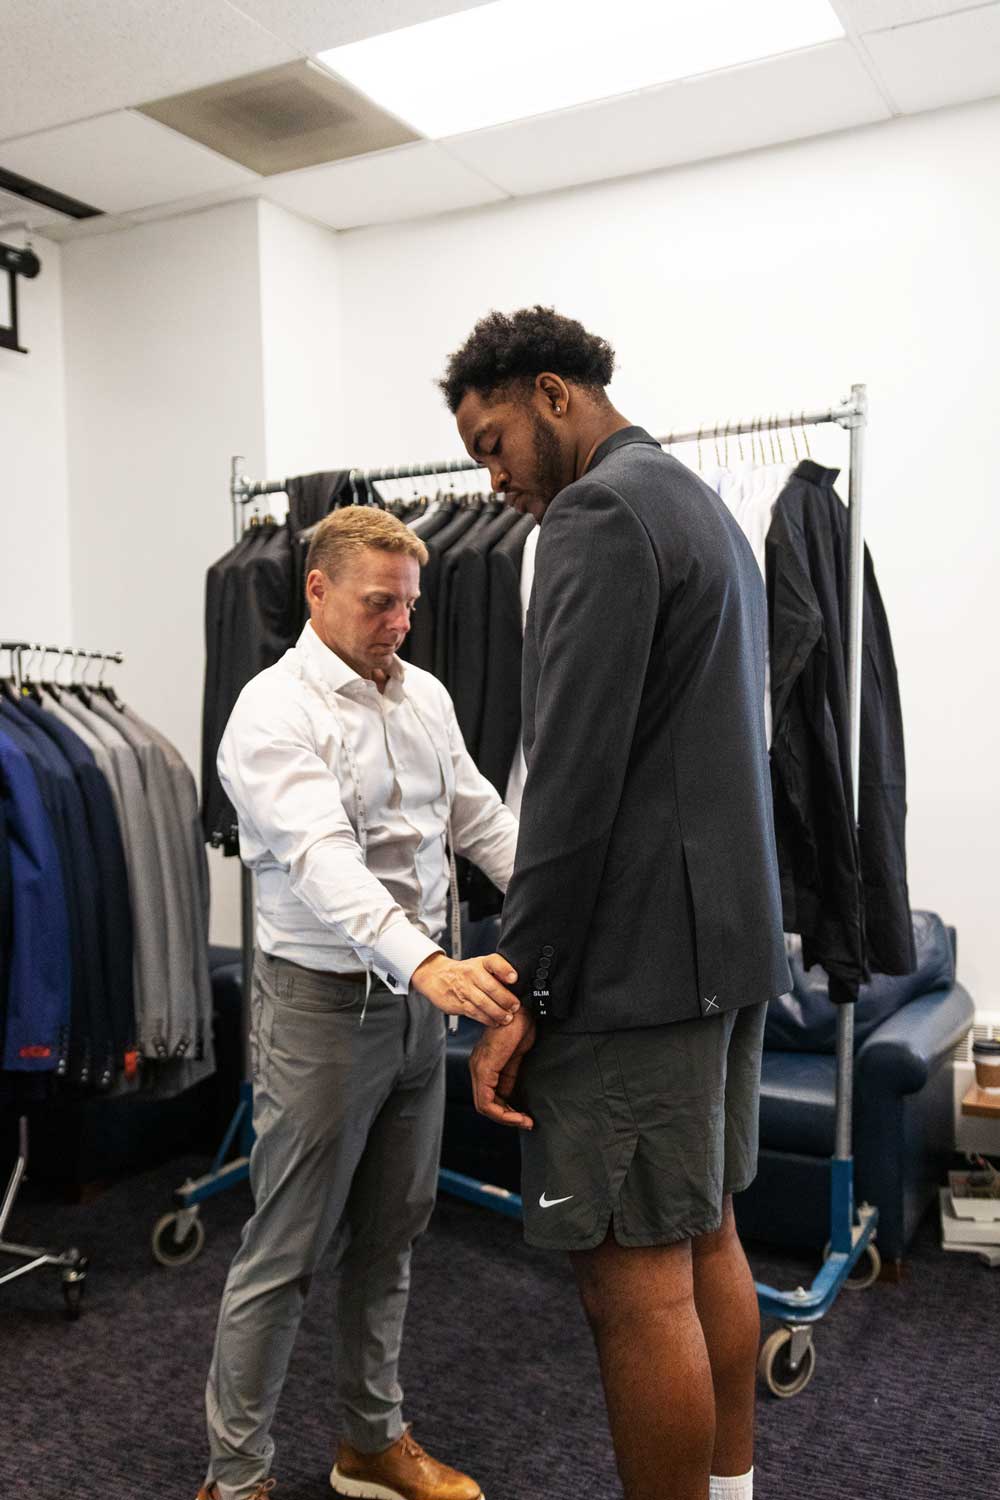 In a suit shop, a man checks the fit of a suit worn by a football player